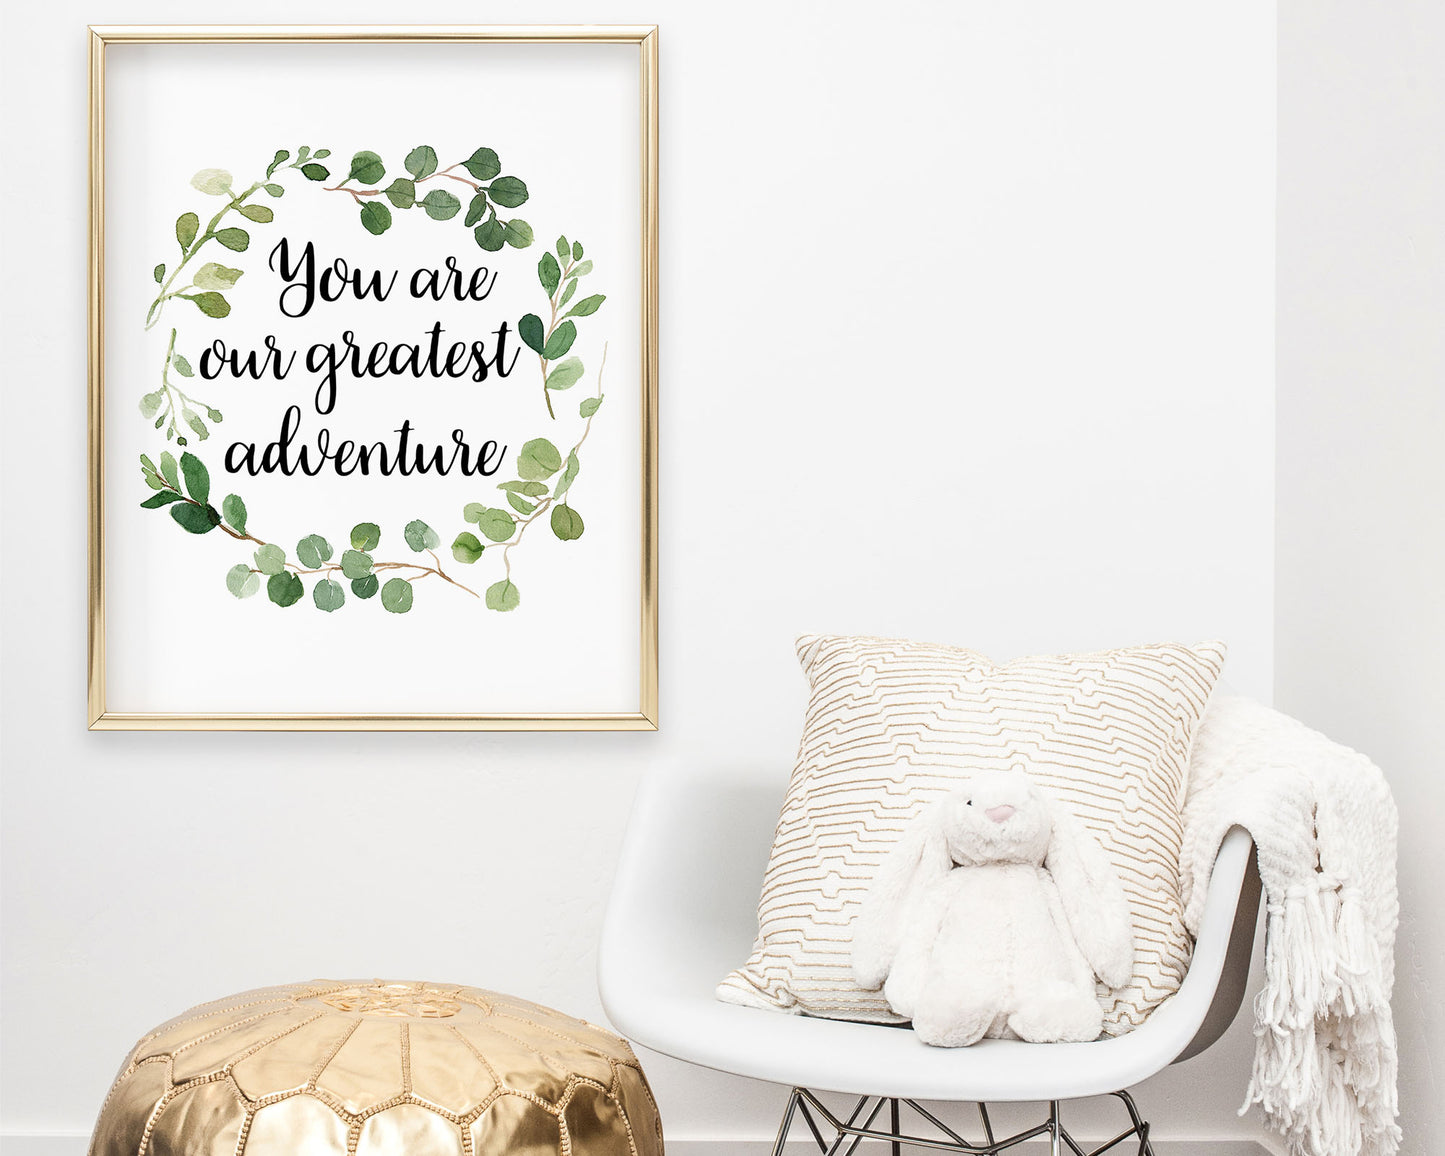 "You are our greatest adventure" quote in cursive lettering inside a Watercolor Greenery Eucalyptus Wreath Printable Wall Art. Great for Baby Boy or Baby Girl Nursery Decor or Kids Room Wall Hangings.